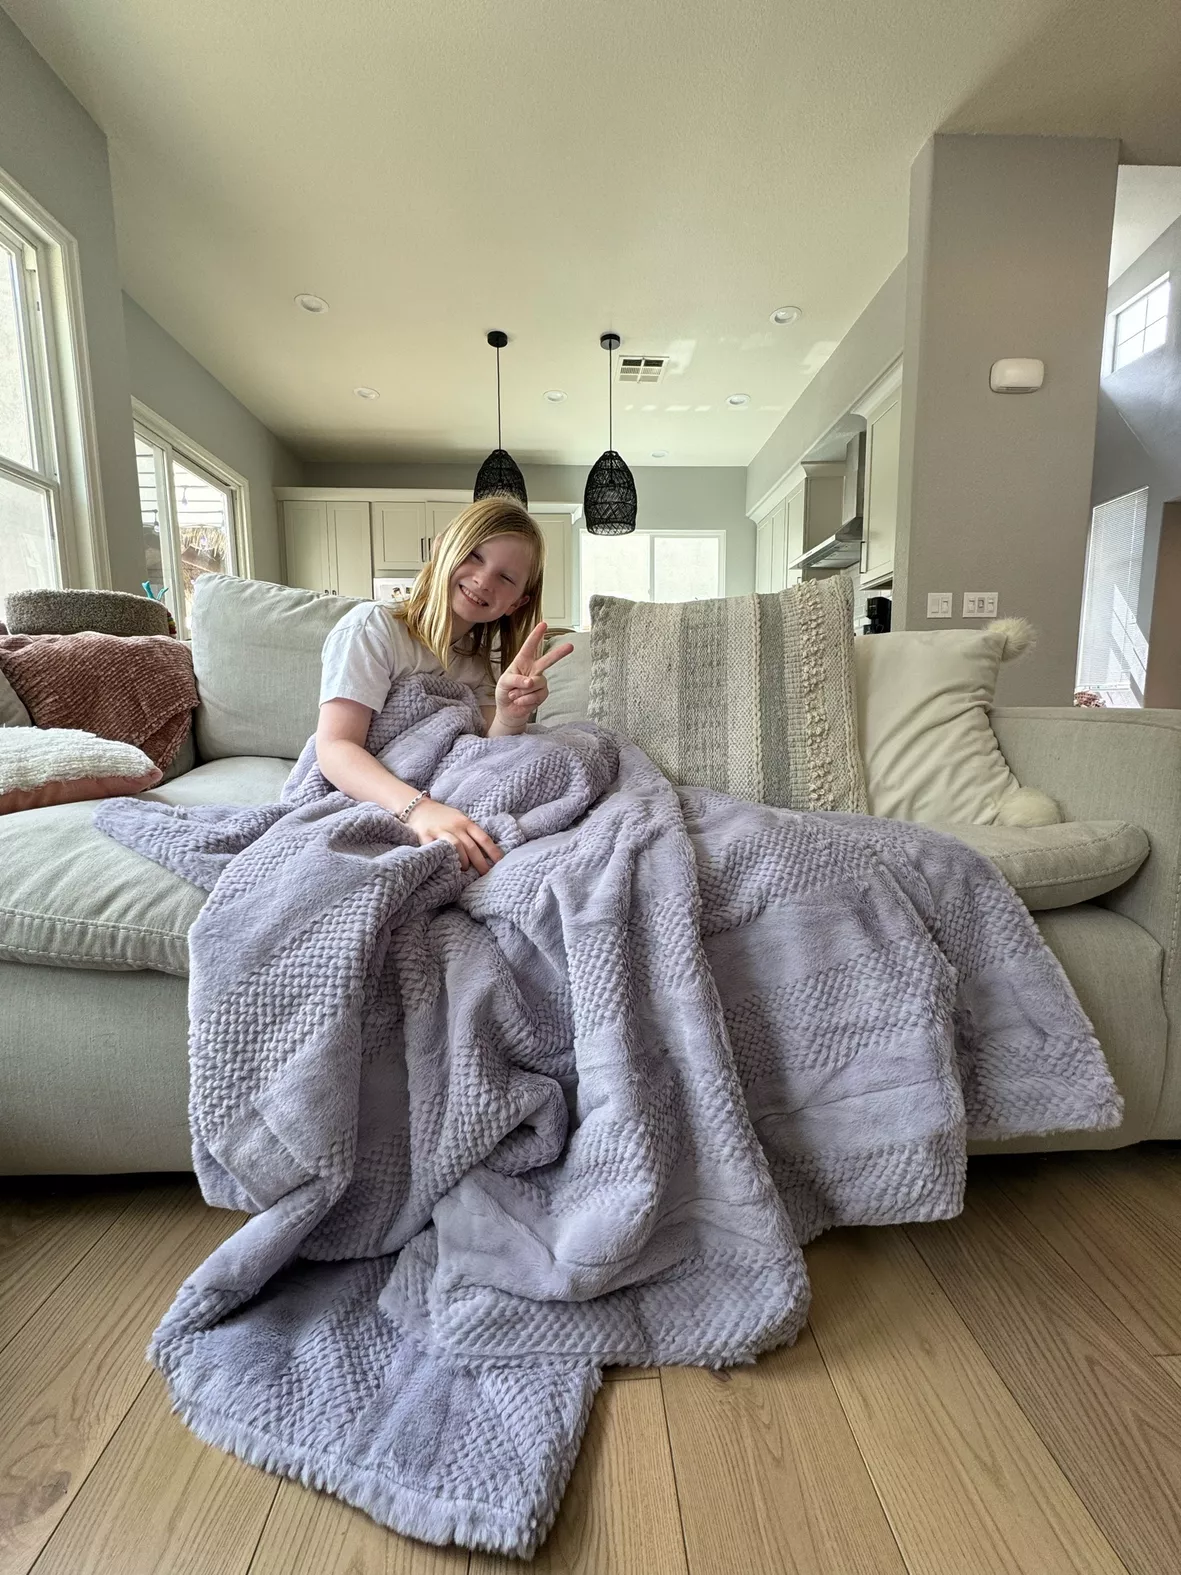 Minky Couture Blanket Sizes: Everything You Need to Know